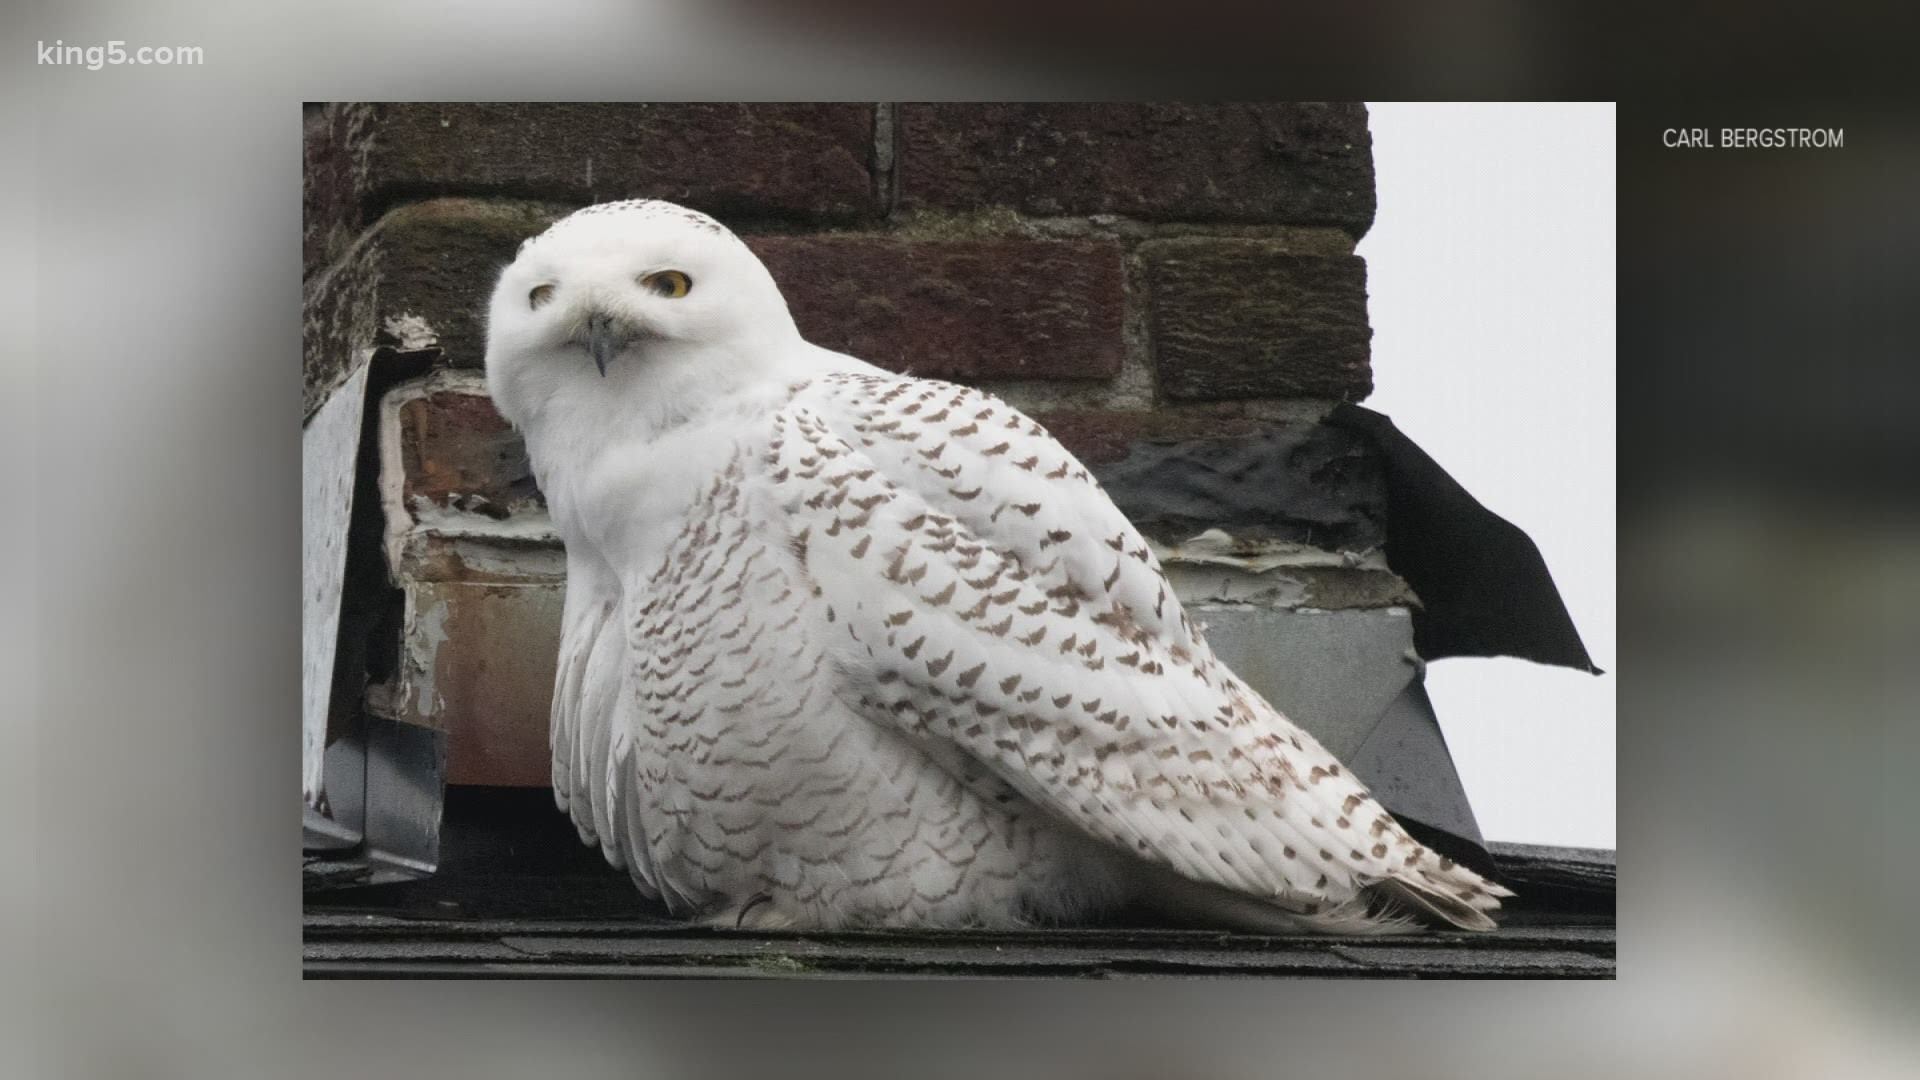 The snowy owl, rarely seen this far south, has been drawing excited crowds to Seattle's Queen Anne neighborhood.